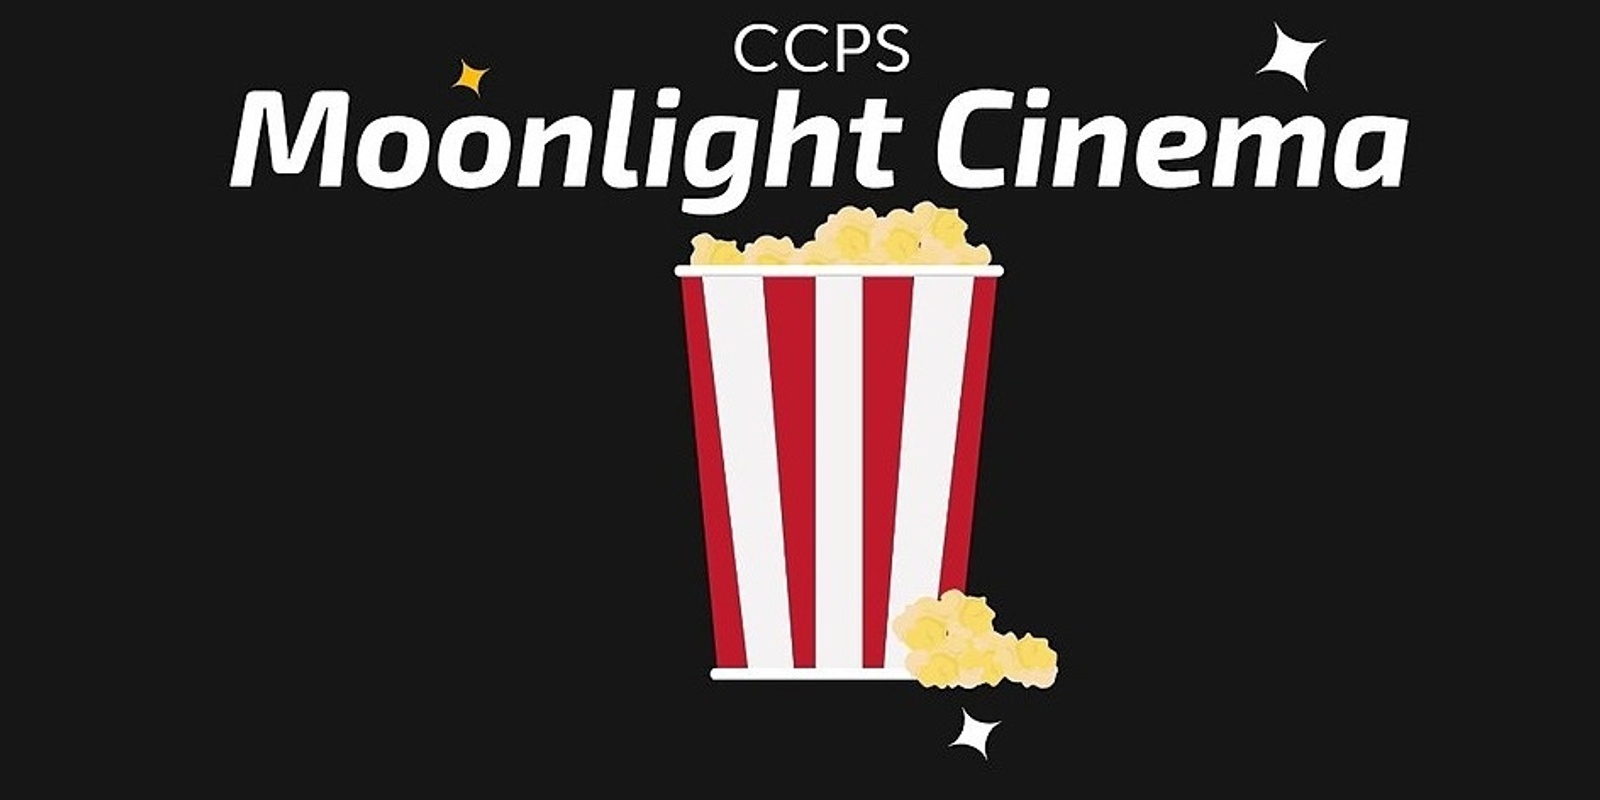 Banner image for CCPS P&C Moonlight Cinema